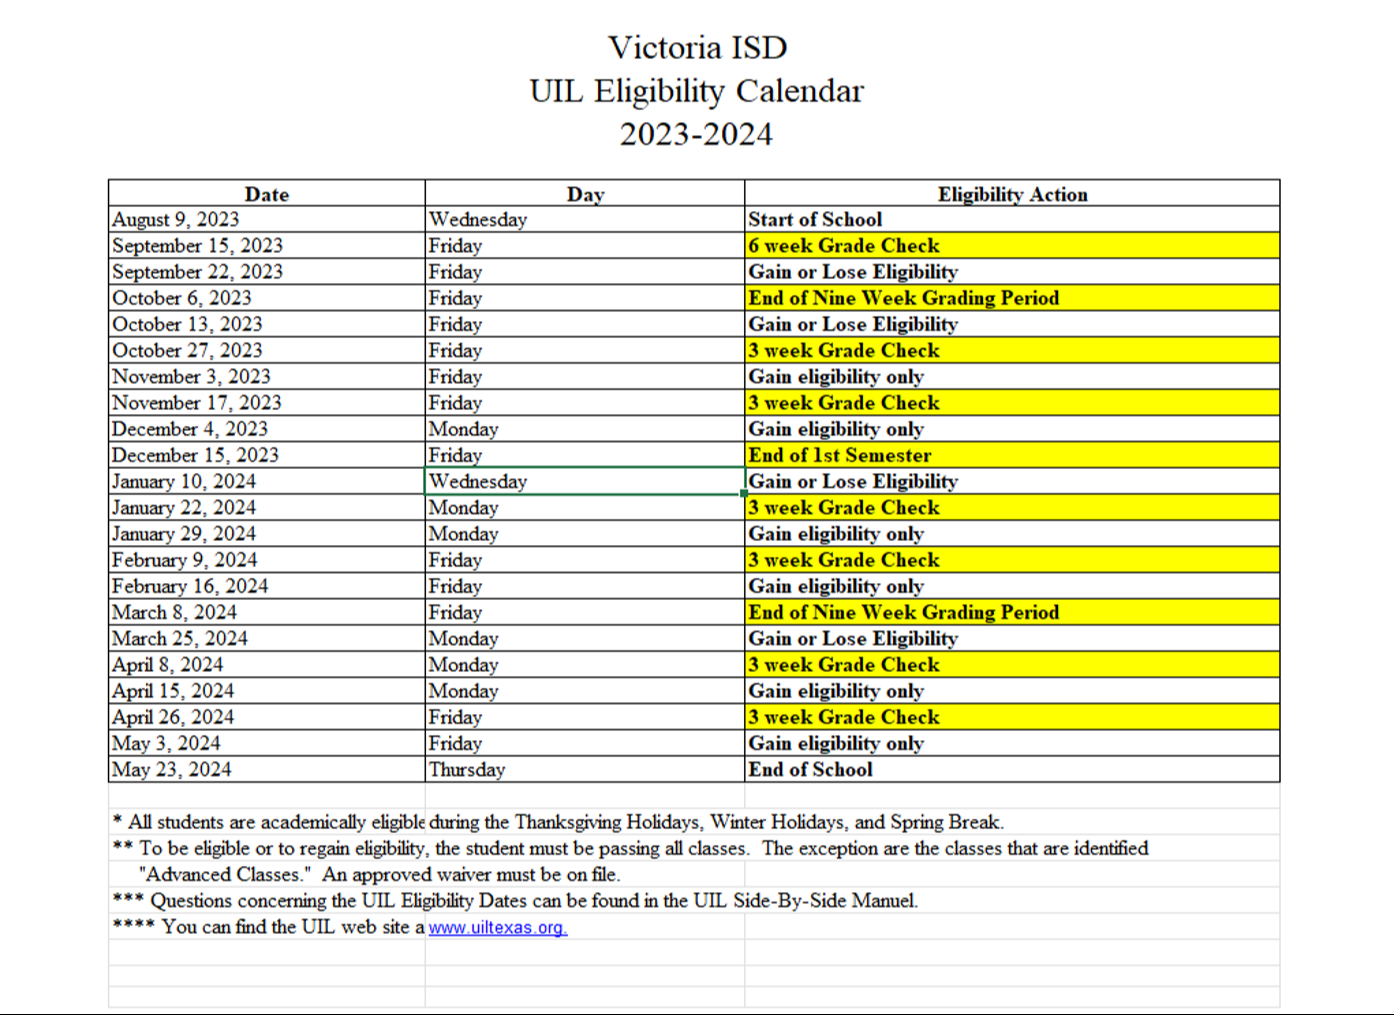 UIL Eligibility Dates